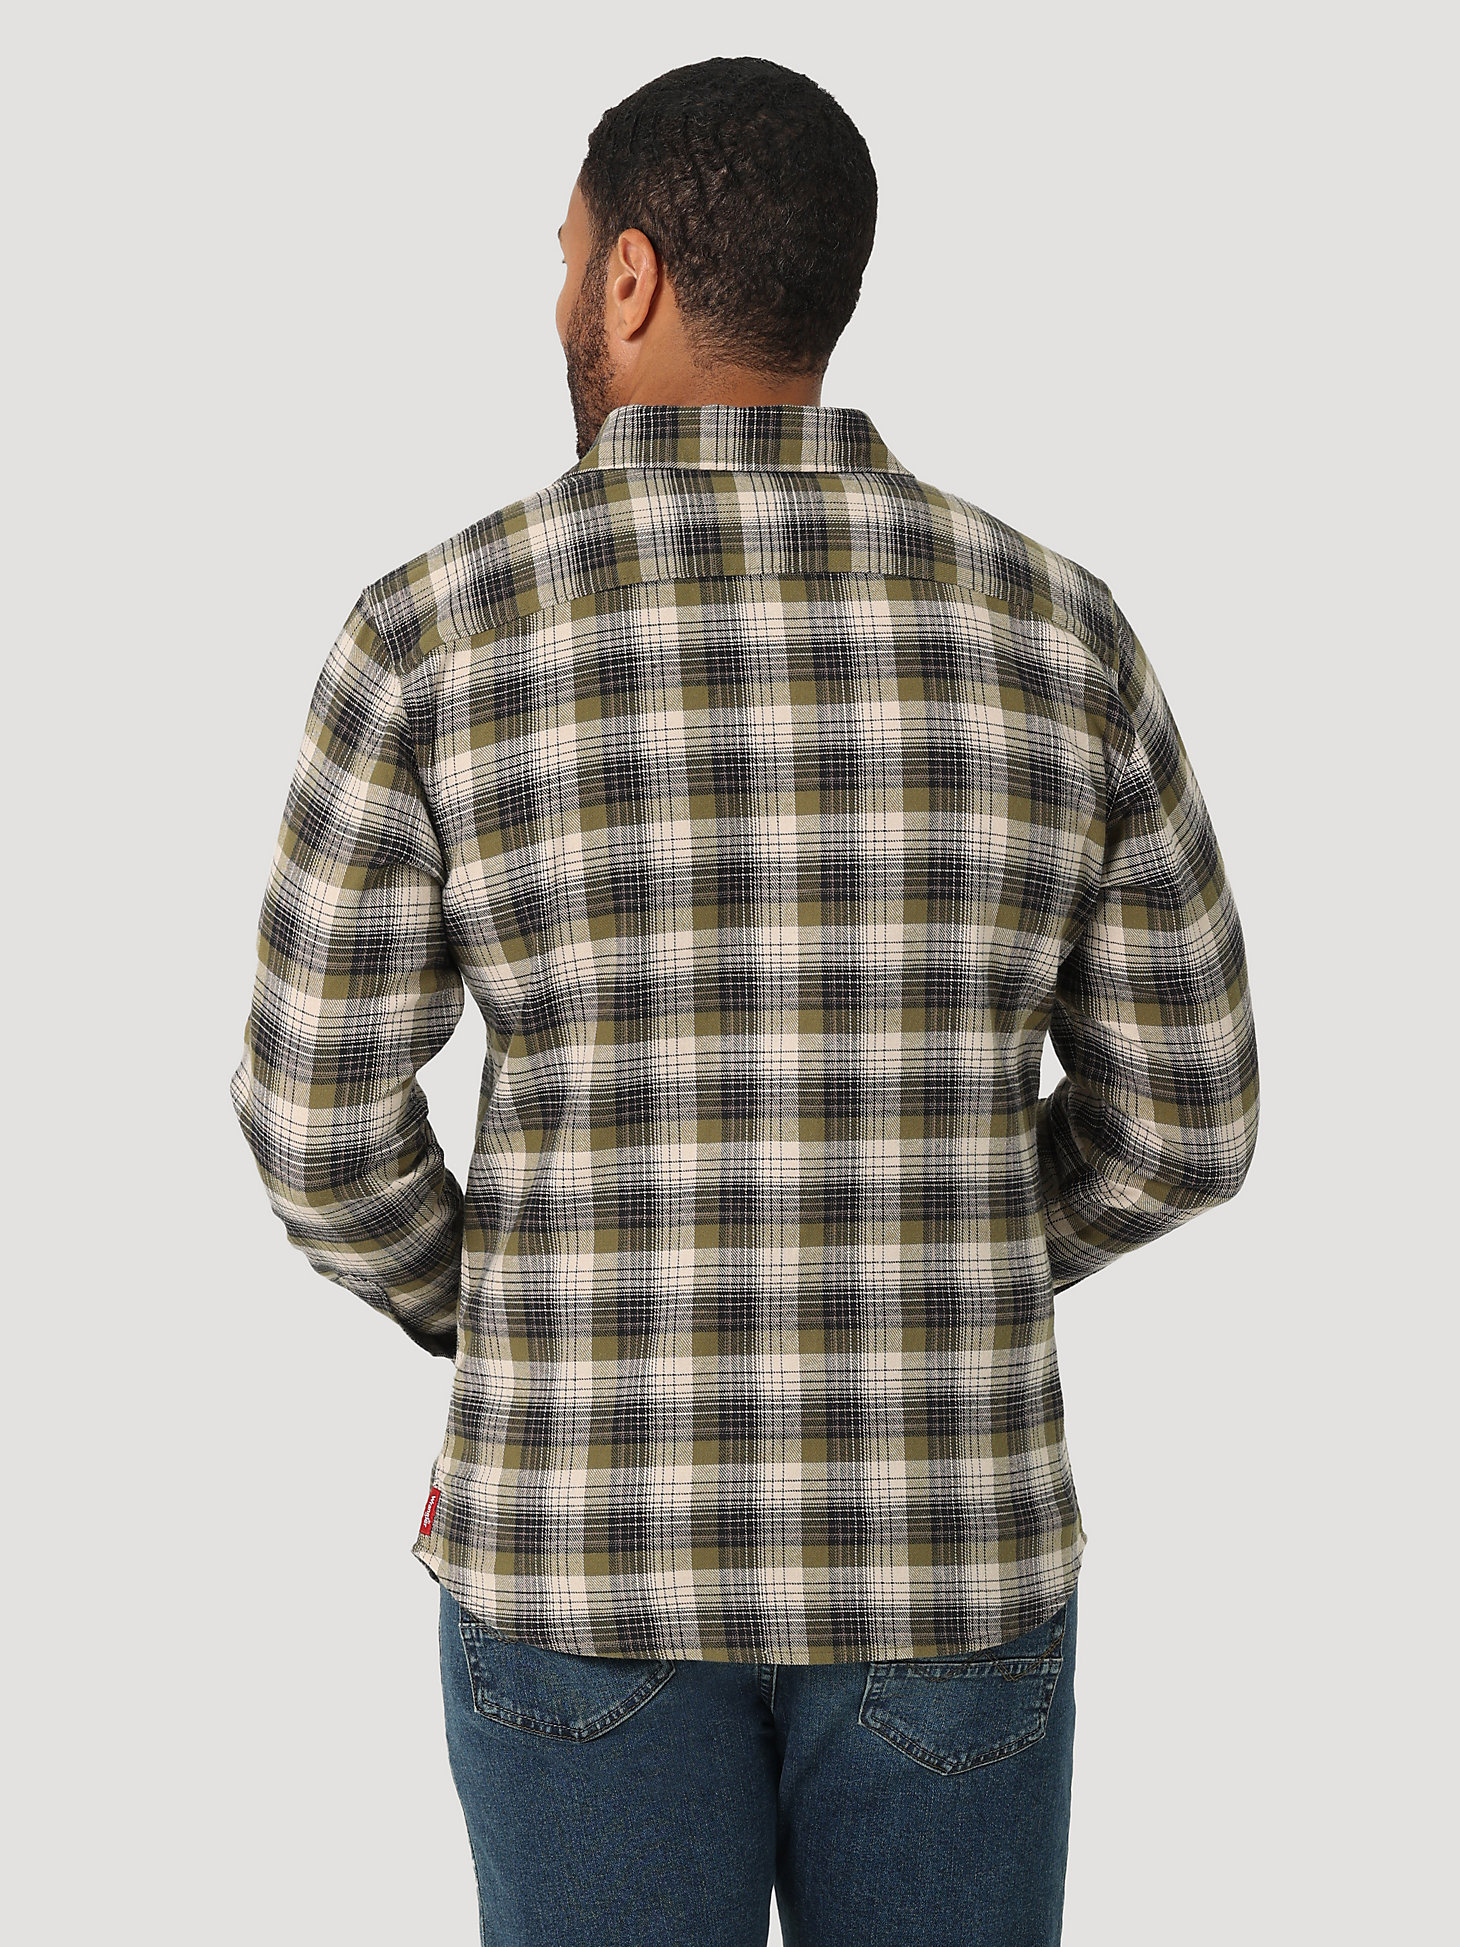 Men's Cloud Flannel™ Free To Stretch™ Shirt in Capulet Olive alternative view 1